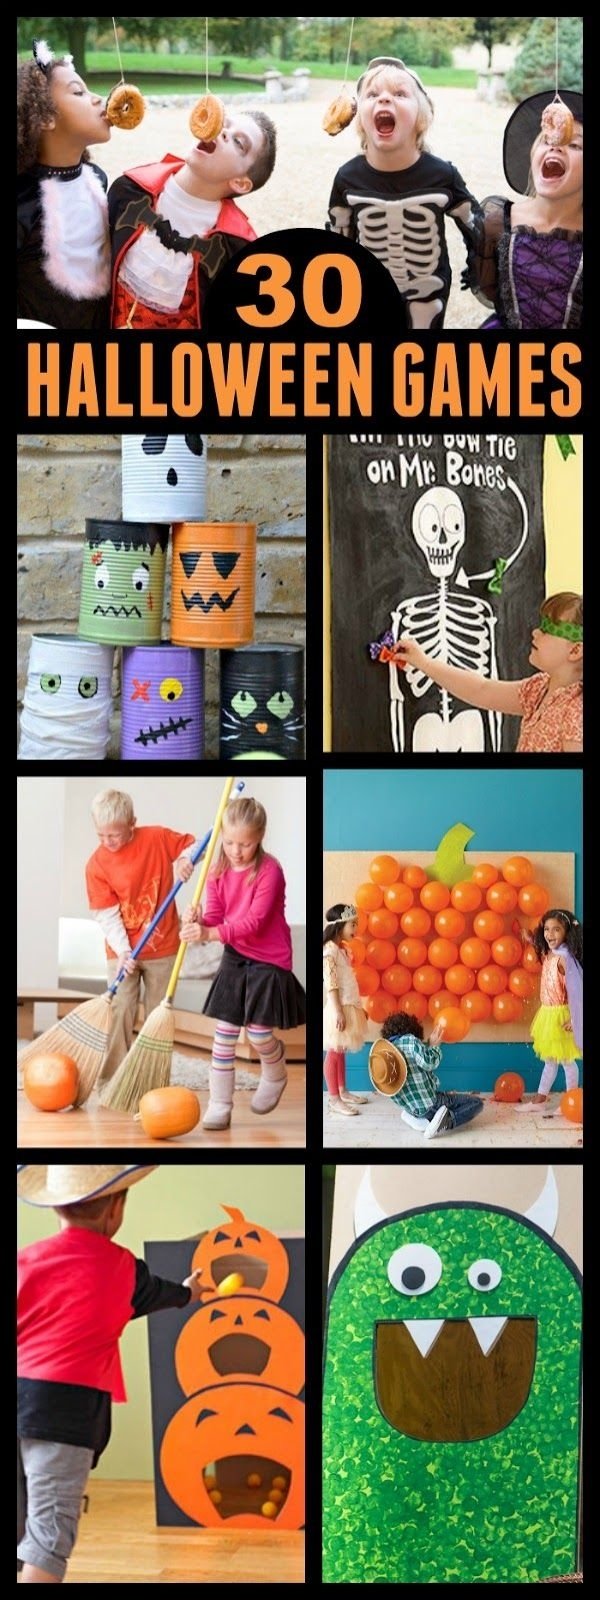 10 Most Recommended Halloween Party Ideas For Teenagers halloween party ideas for teenagers games wedding 2022